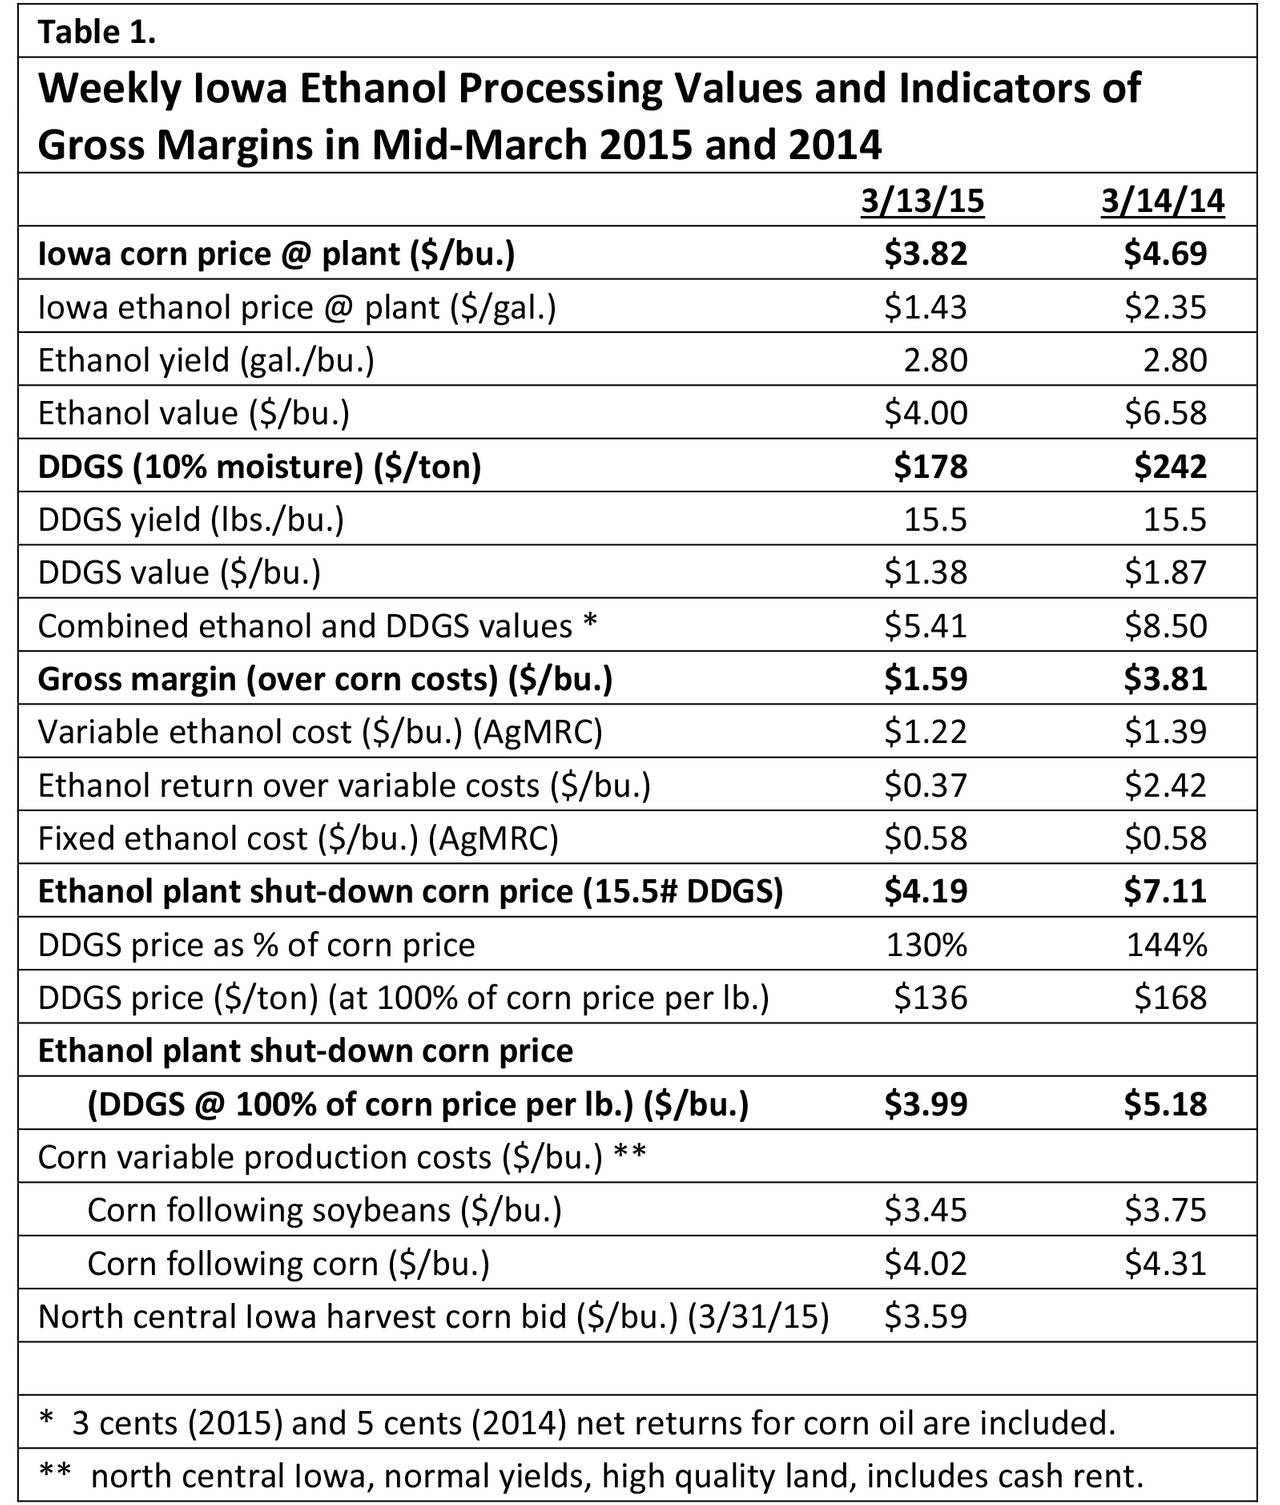 Corn Cost Per Acre Spreadsheet With Impact Of Low Ethanol Prices On The Corn Market  Agricultural